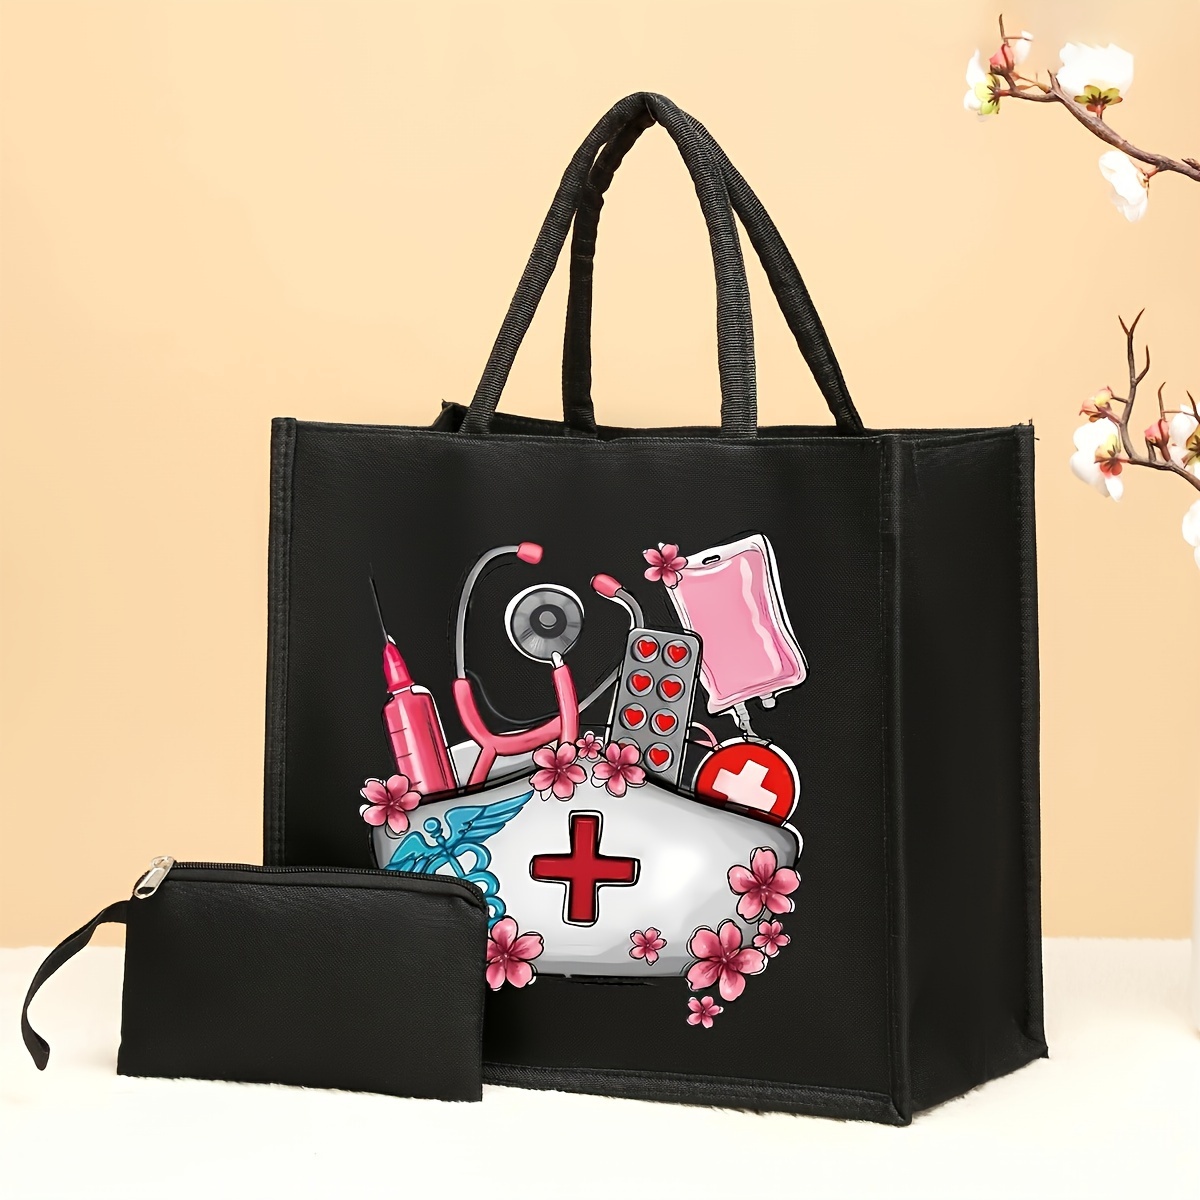 

2pcs Nurse Pattern Thermal Transfer Printed Hand Tito Tertoba With A Small Coin Bag Is Suitable For Sending To Teachers, Friends, Family Gifts, Suitable For Vacation On The Beach